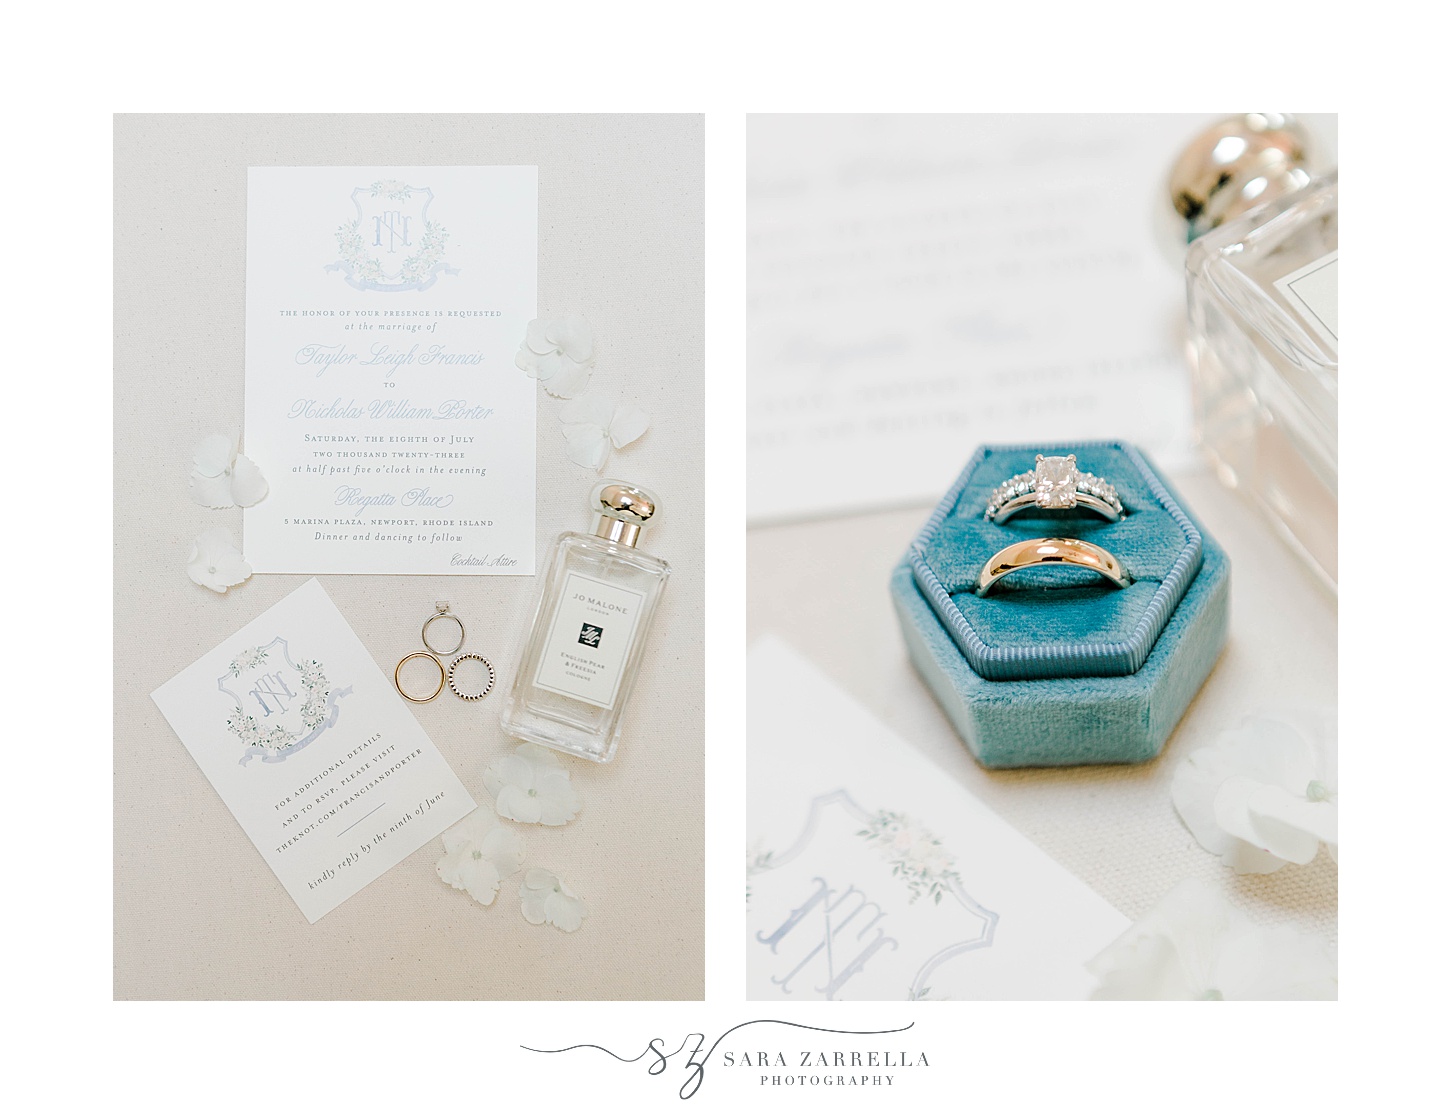 invitation suite and ring in teal ring box before Rhode Island wedding